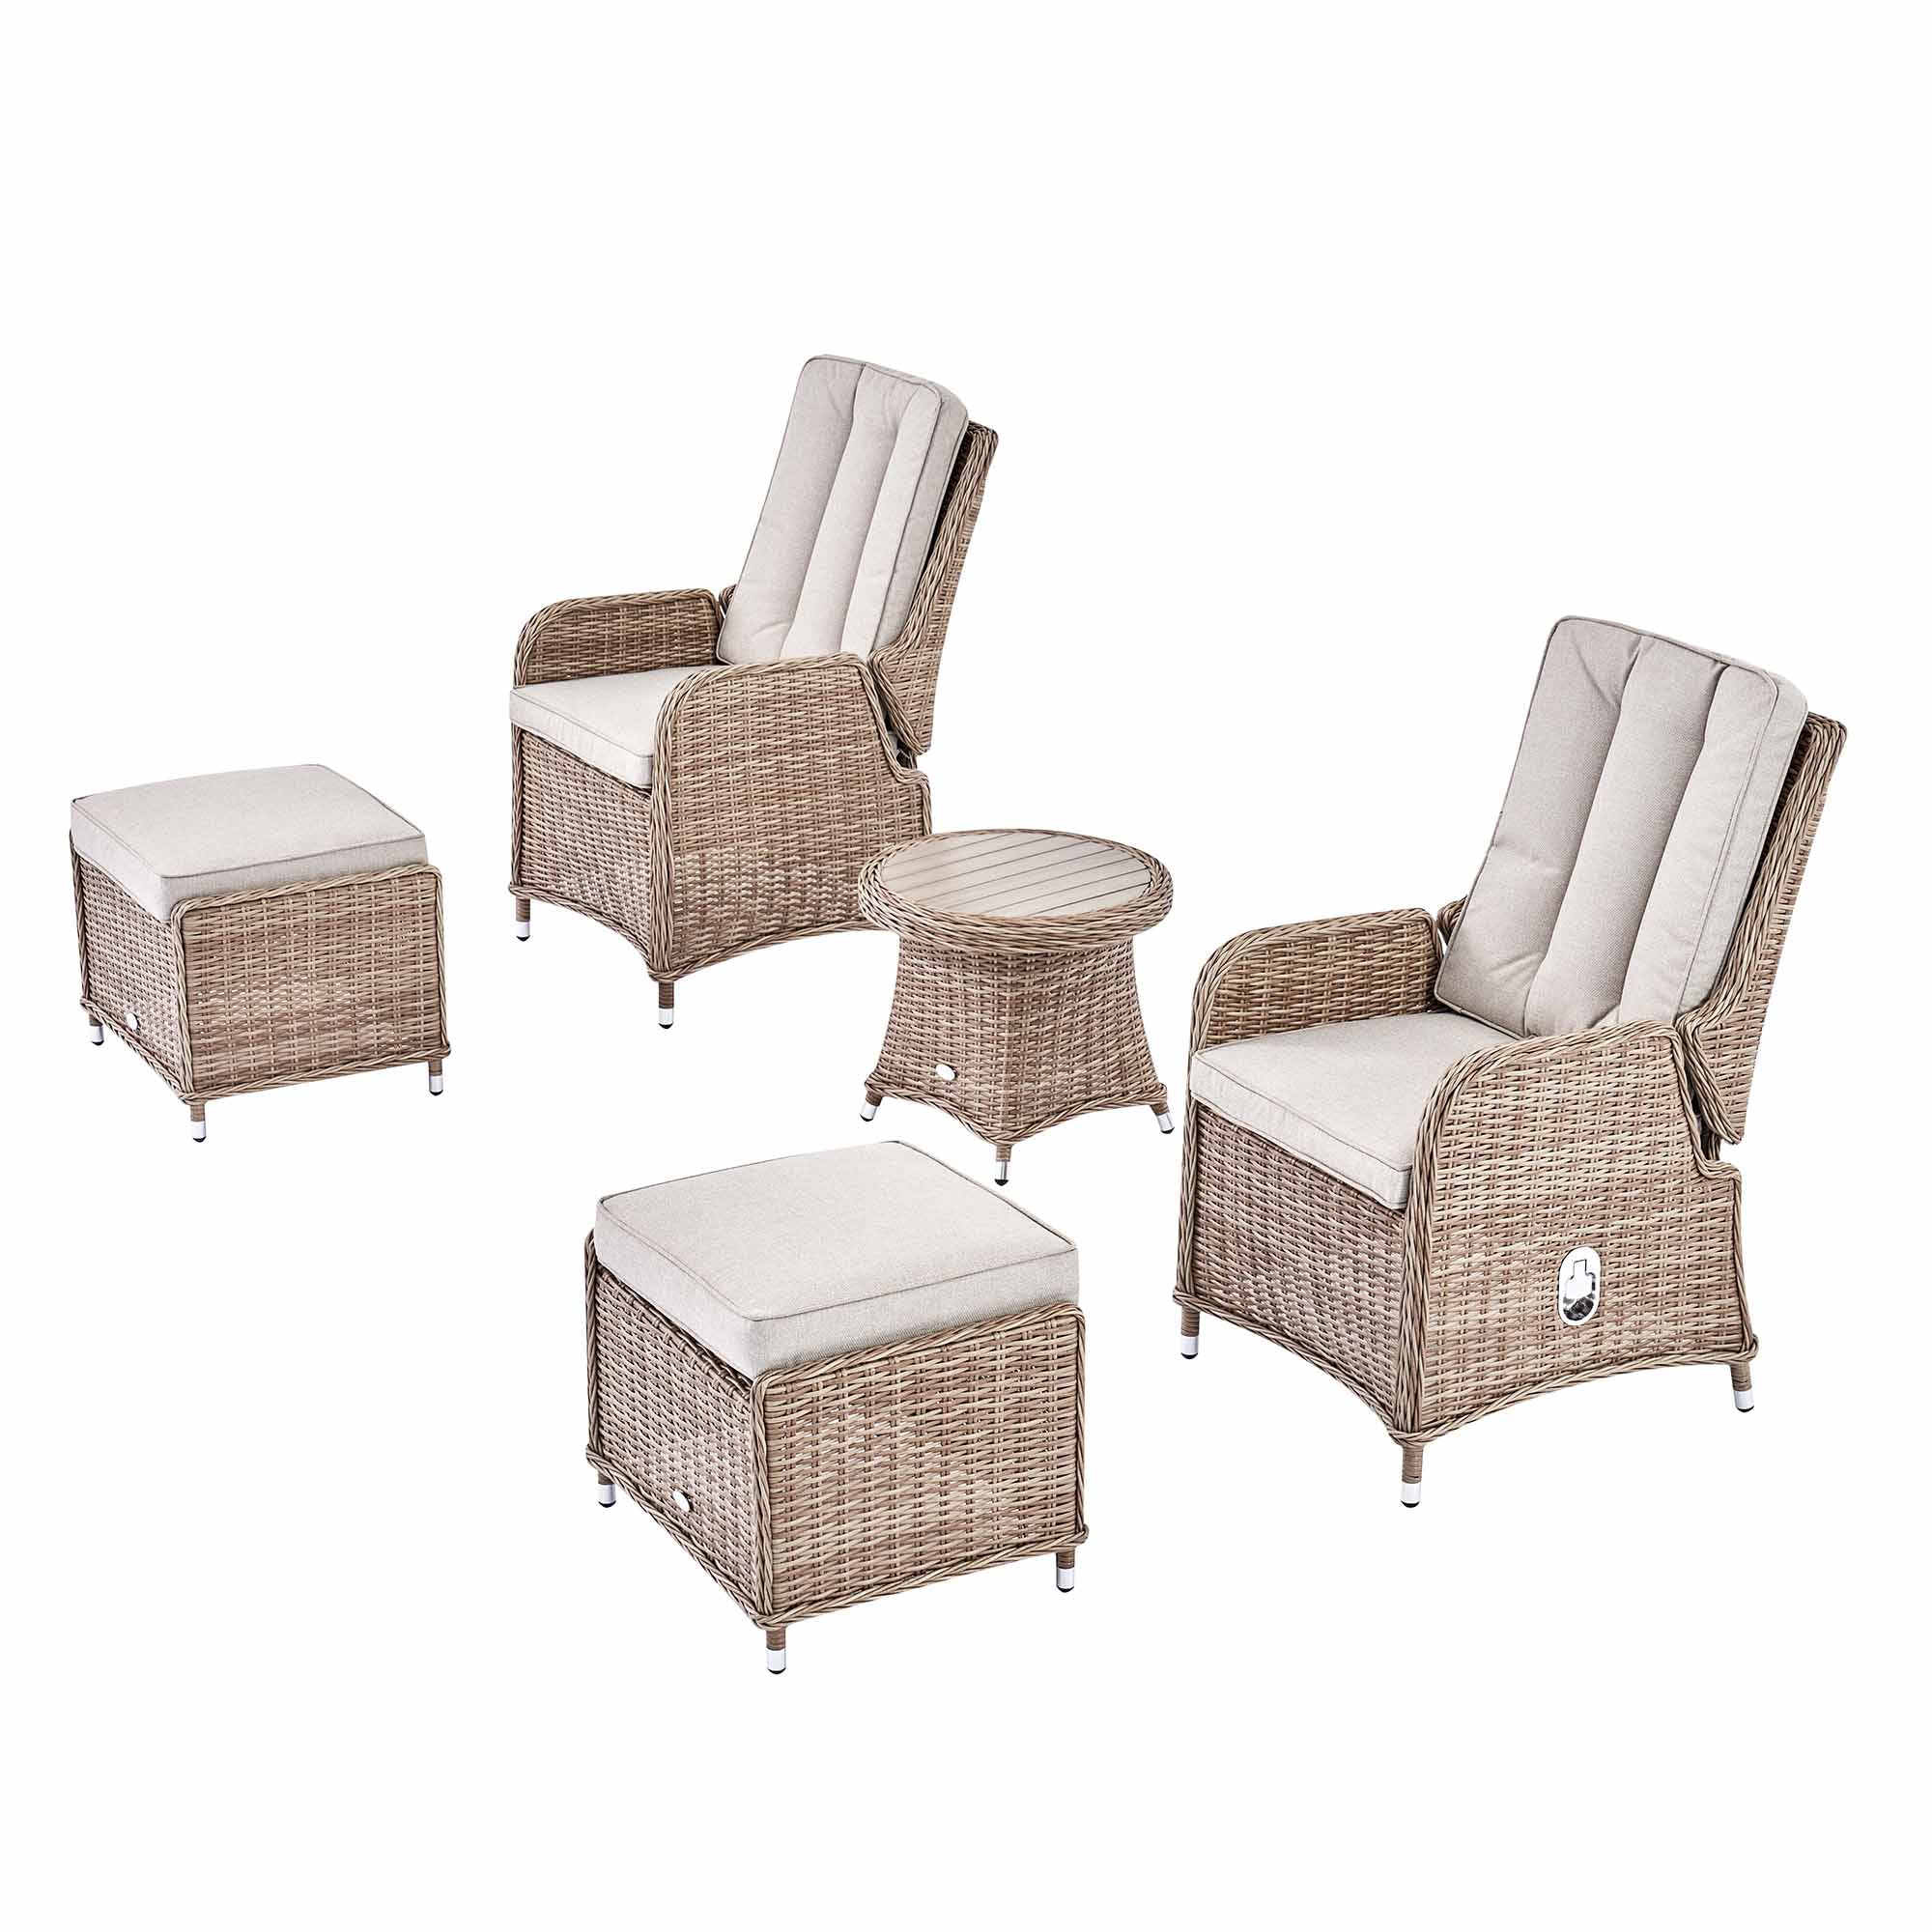 Hampshire 2-Seater Round Wicker Reclining Bistro Set with Stools, Natural